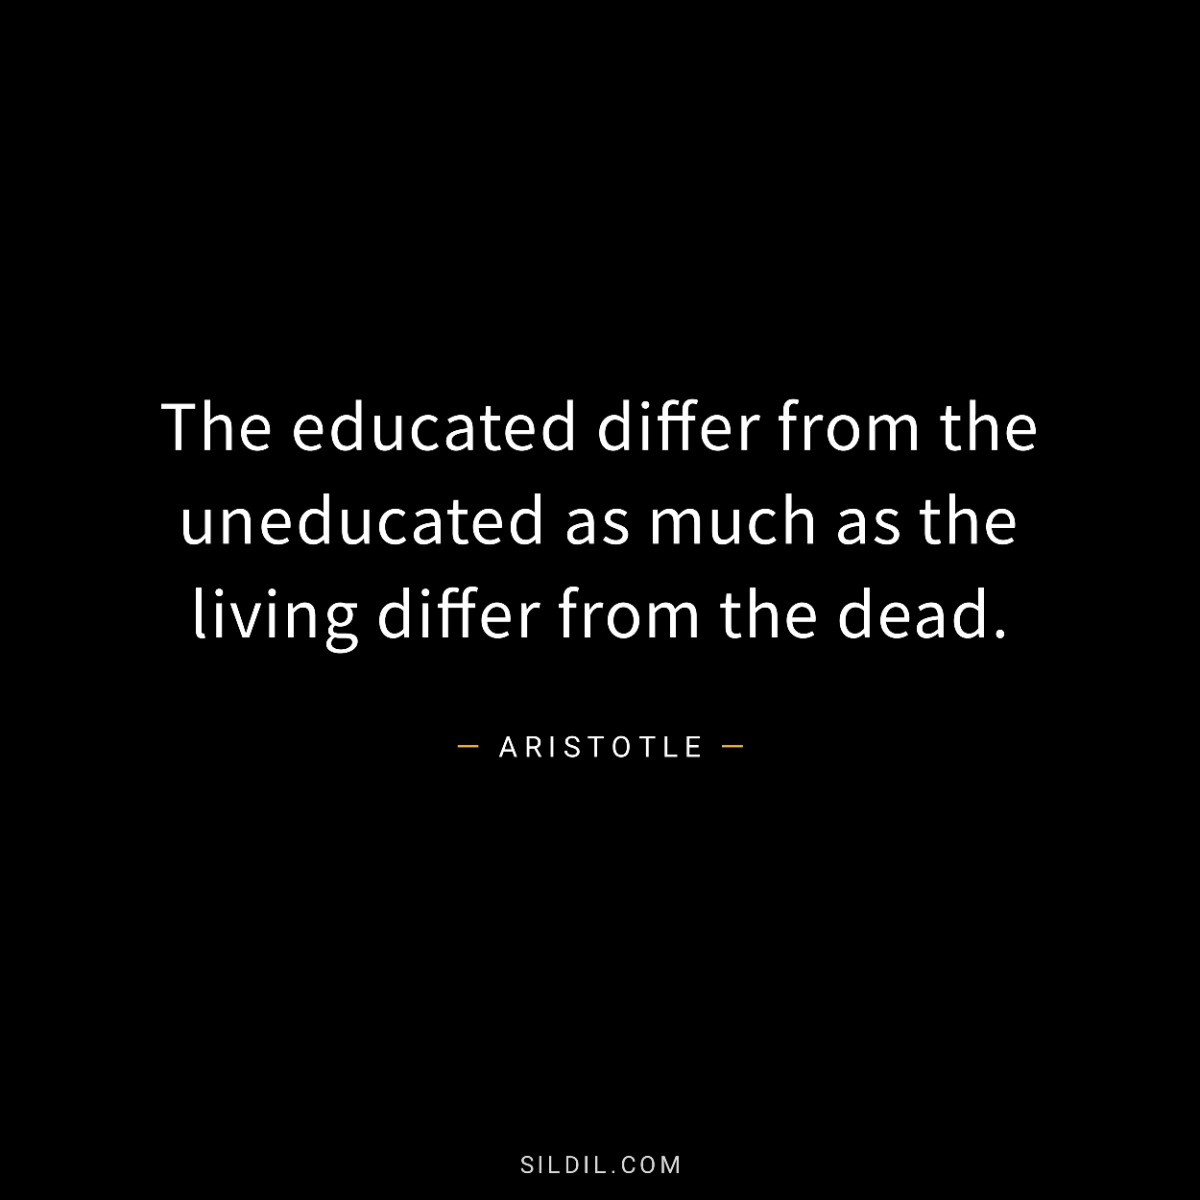 The educated differ from the uneducated as much as the living differ from the dead.